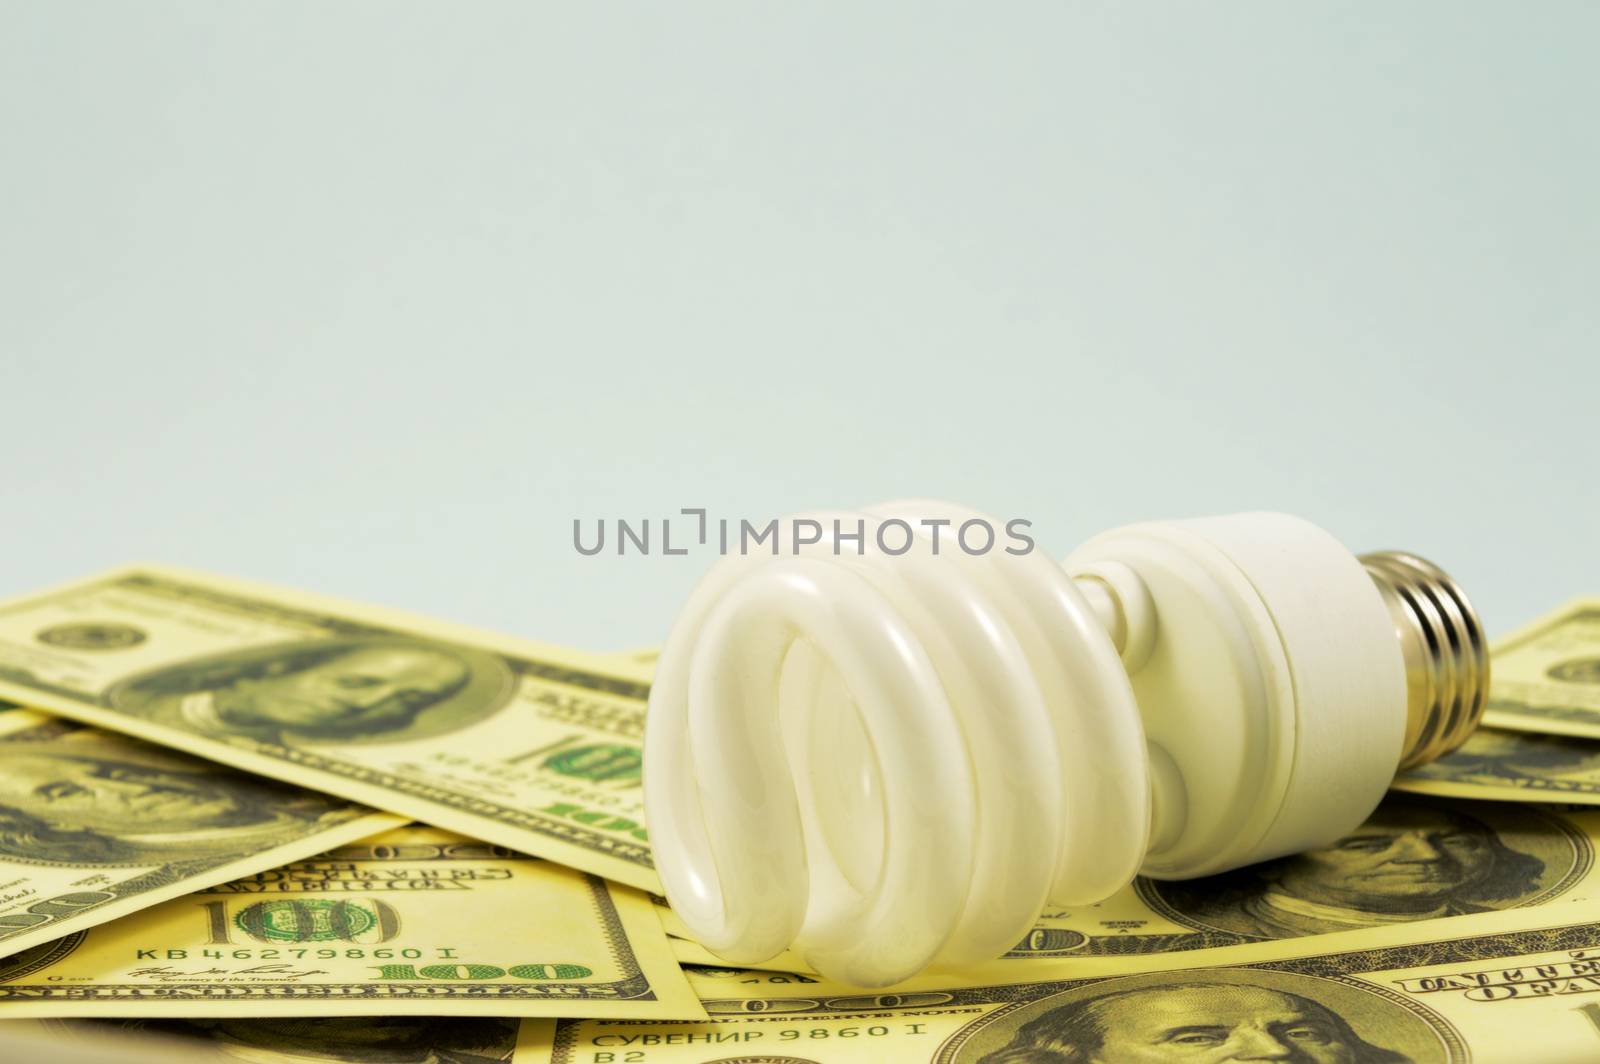 An image based on how CFL bulbs can save you money by using them over standard lights.